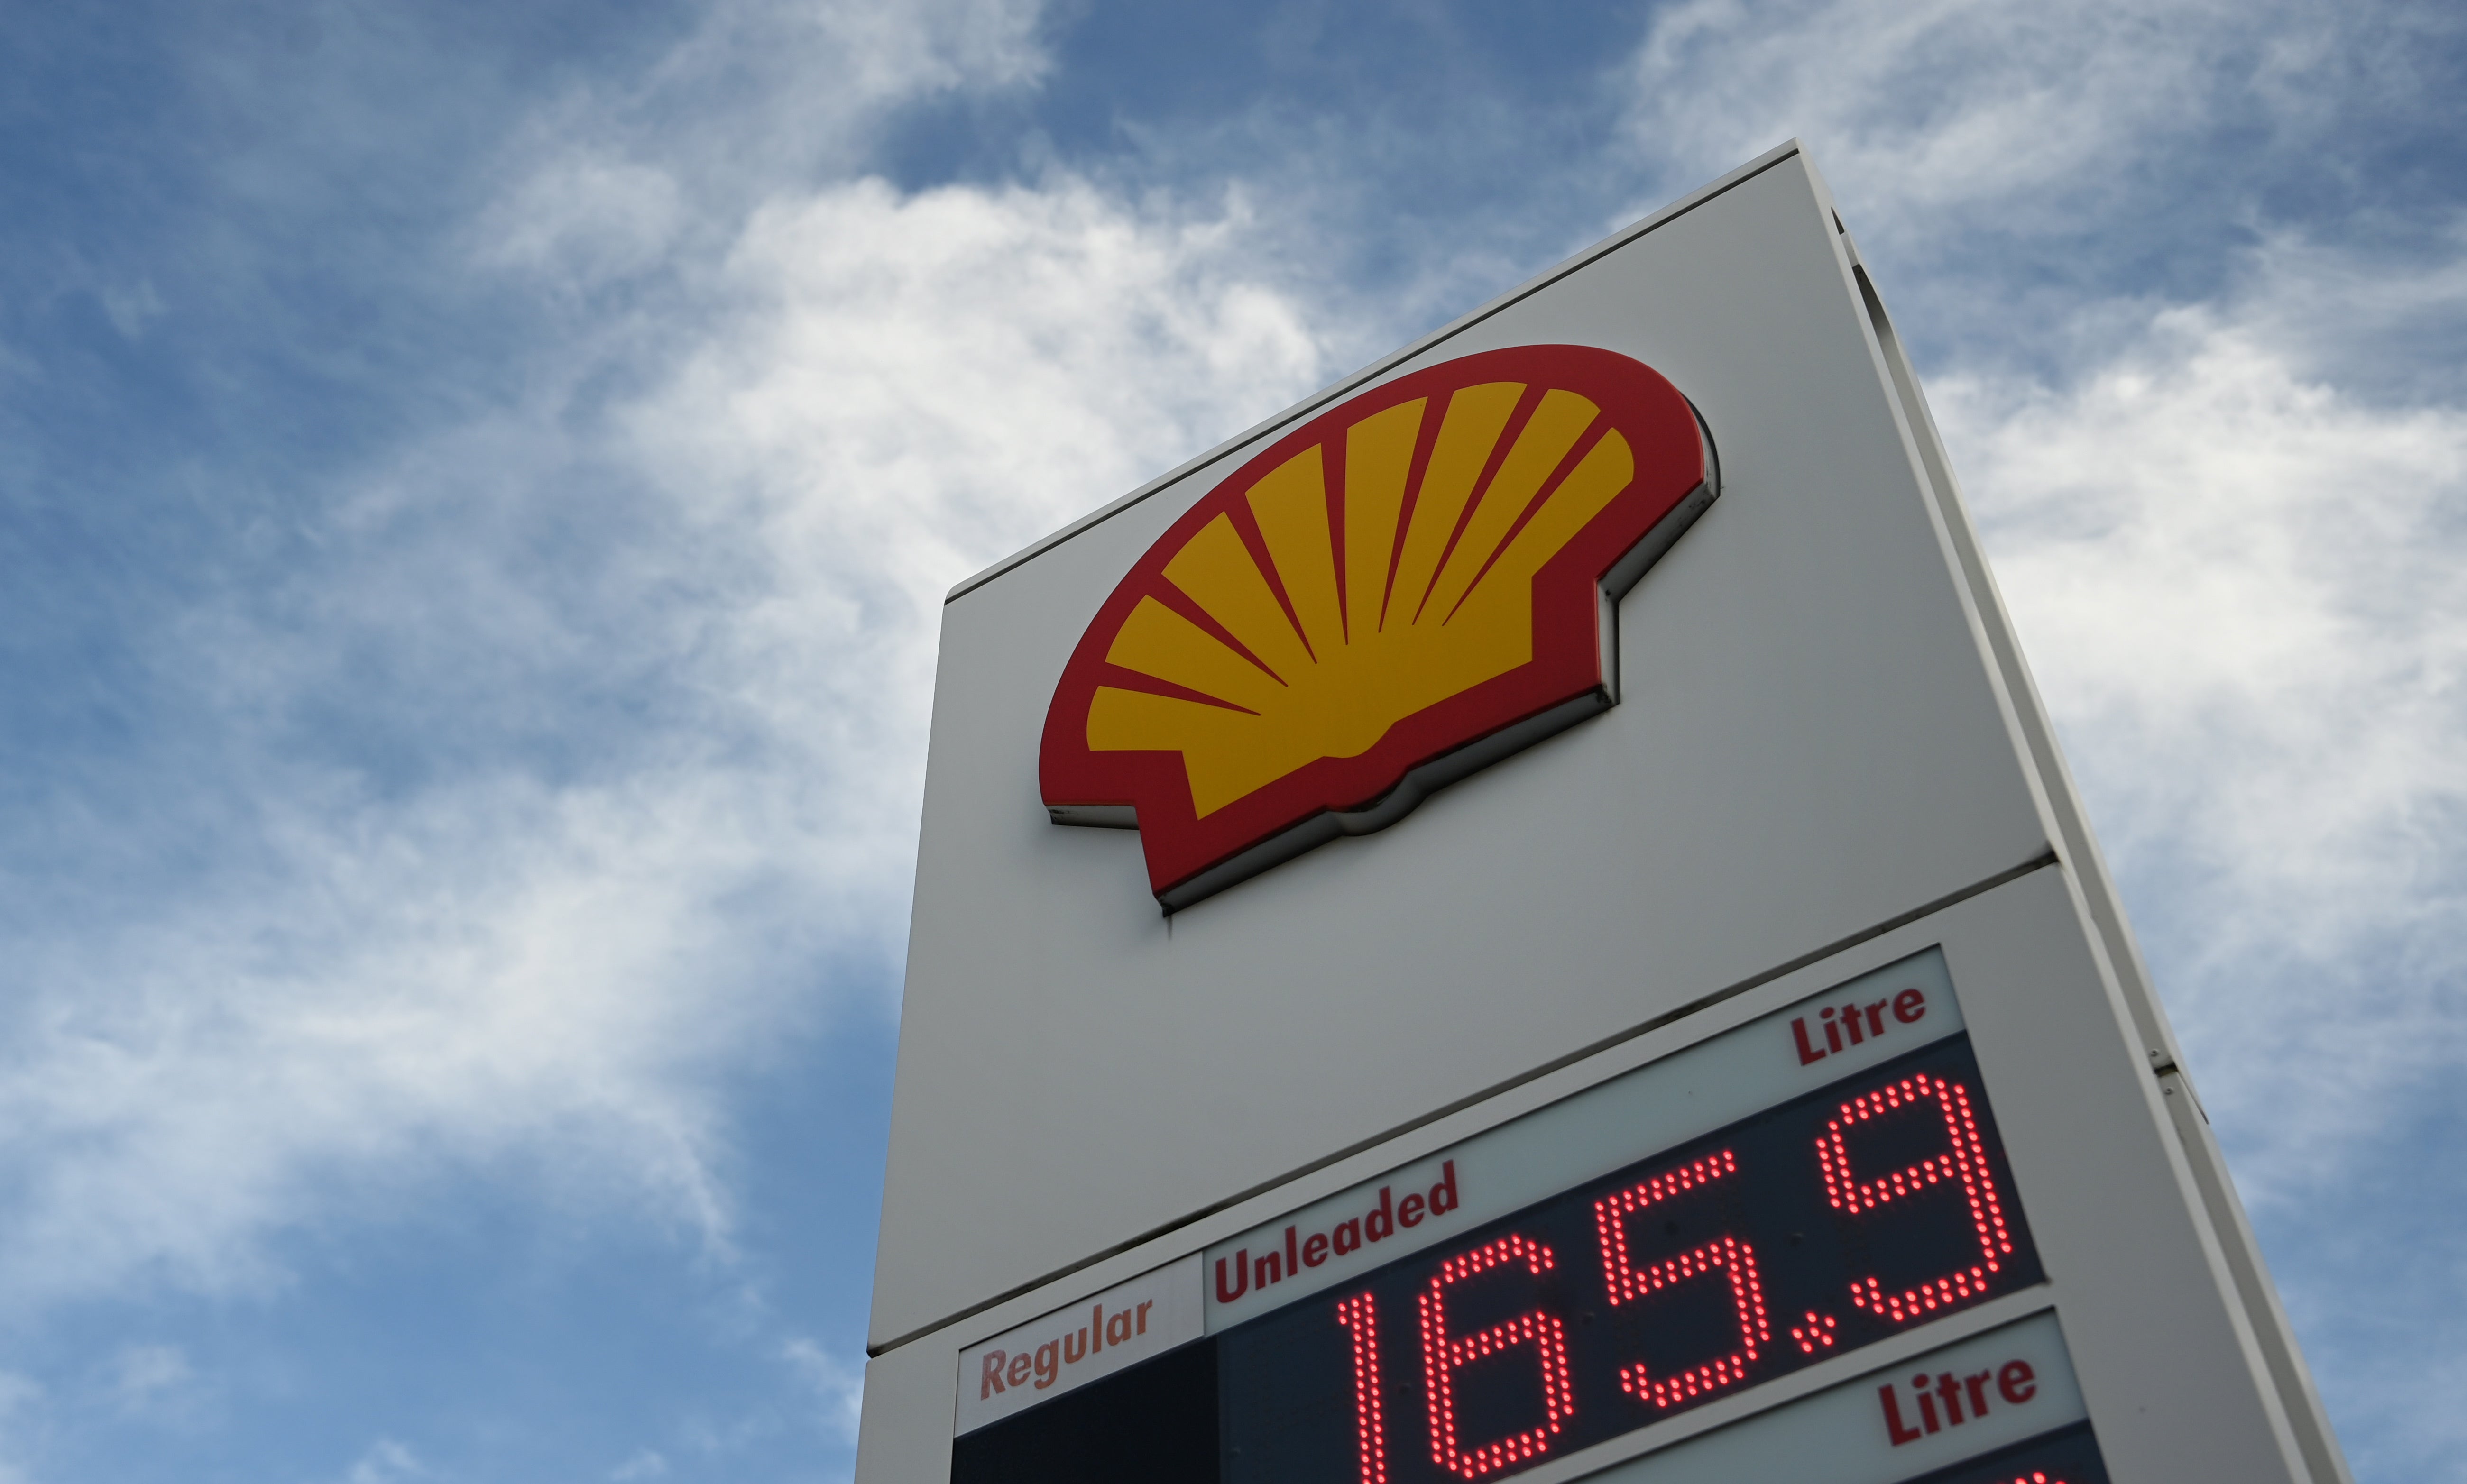 Shell has reported a huge rise in profits as millions struggle with energy bills